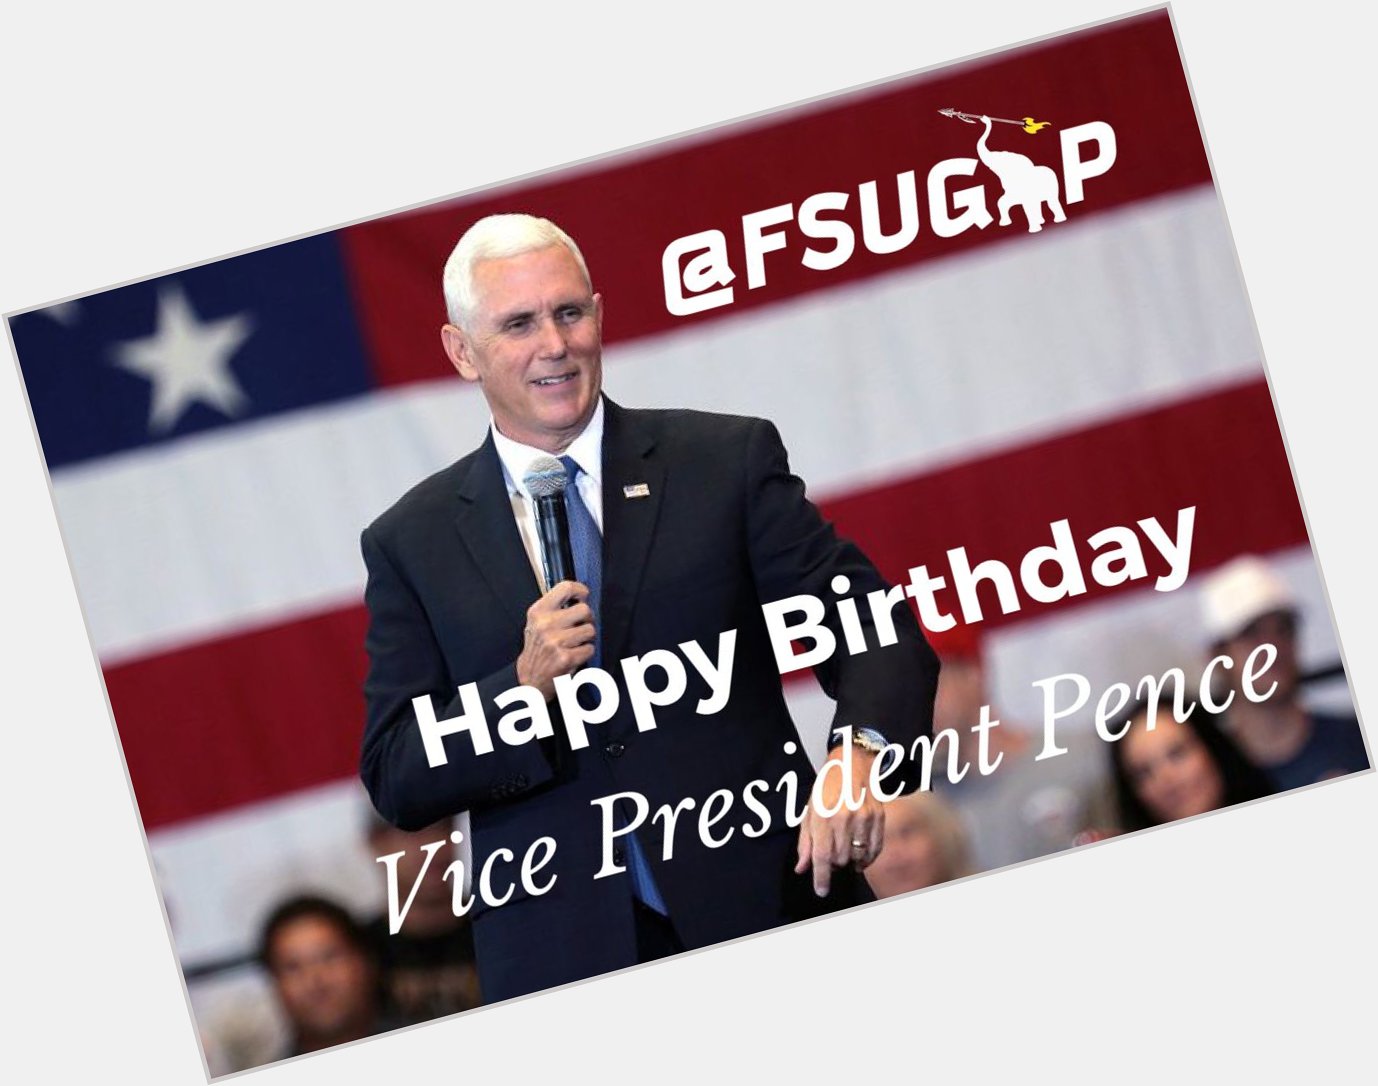 Wishing a happy birthday to our wonderful Mike Pence!! 